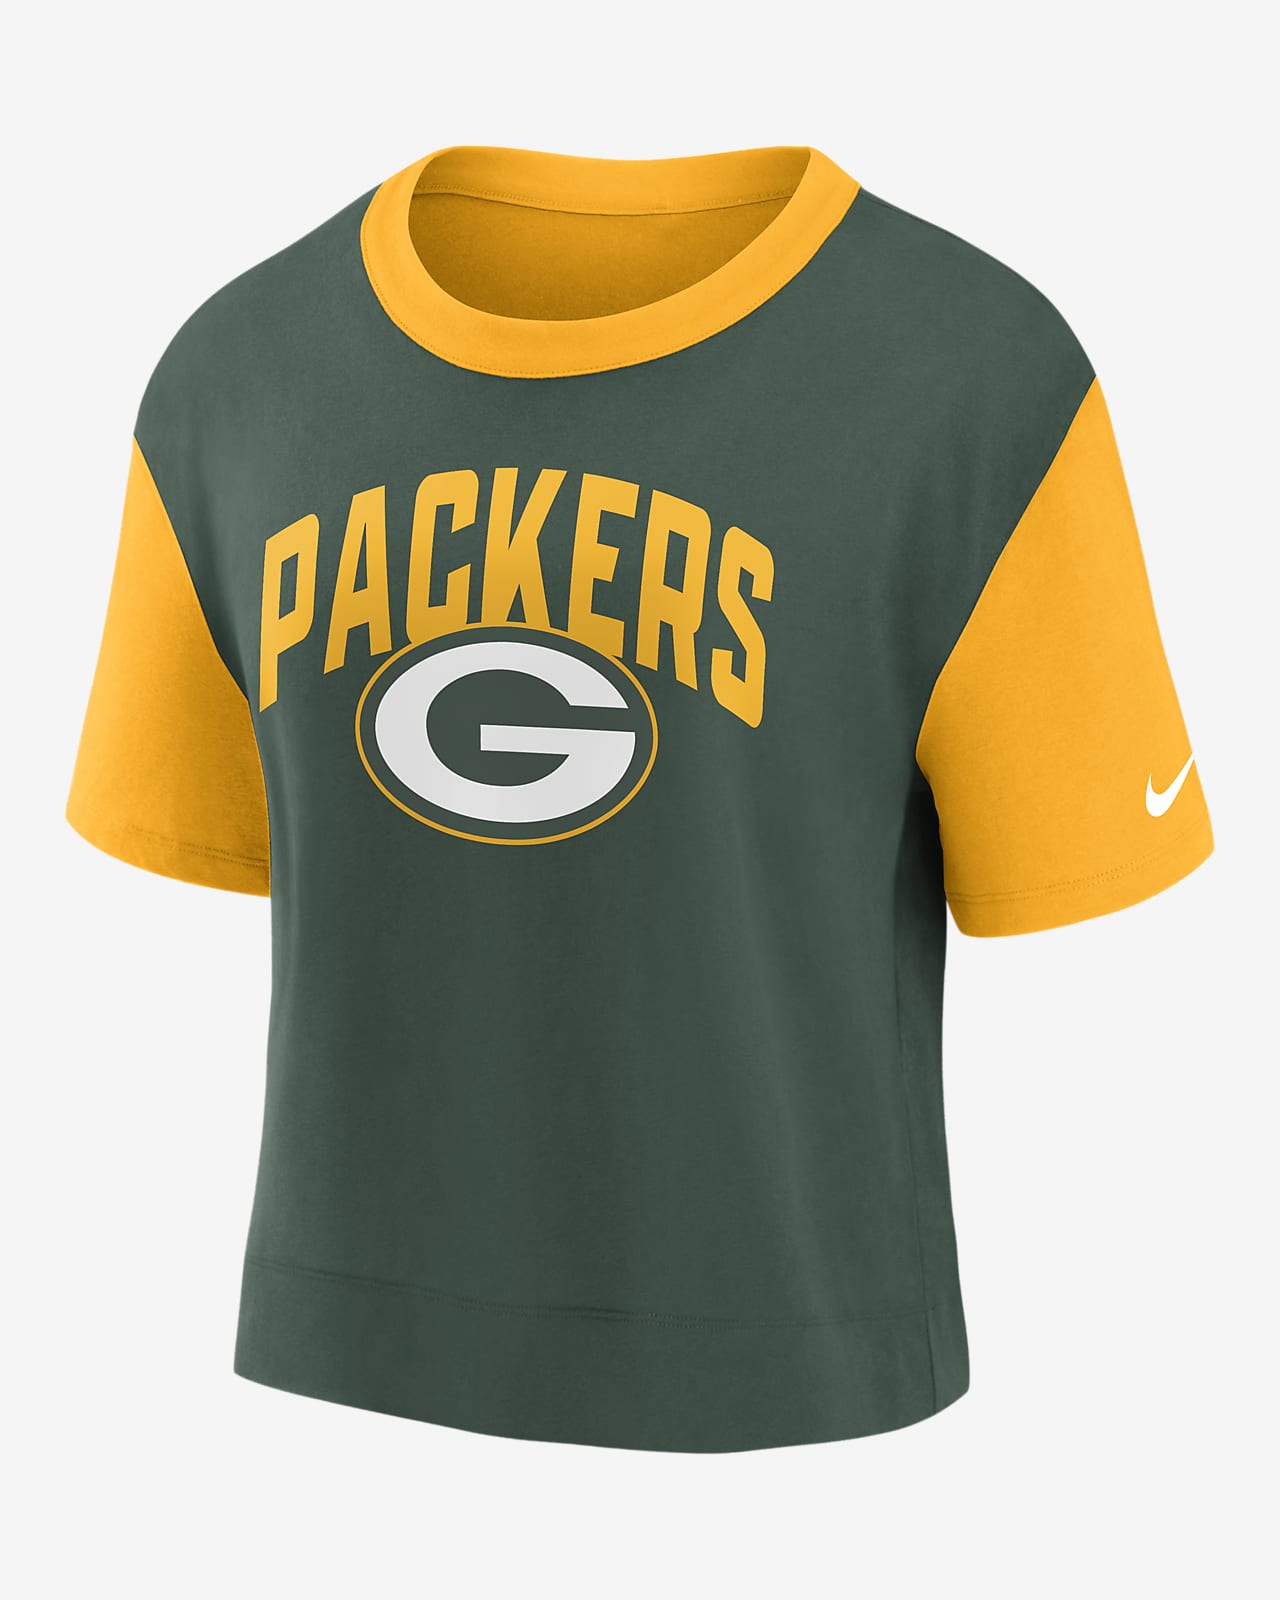 green bay packers clothes near me